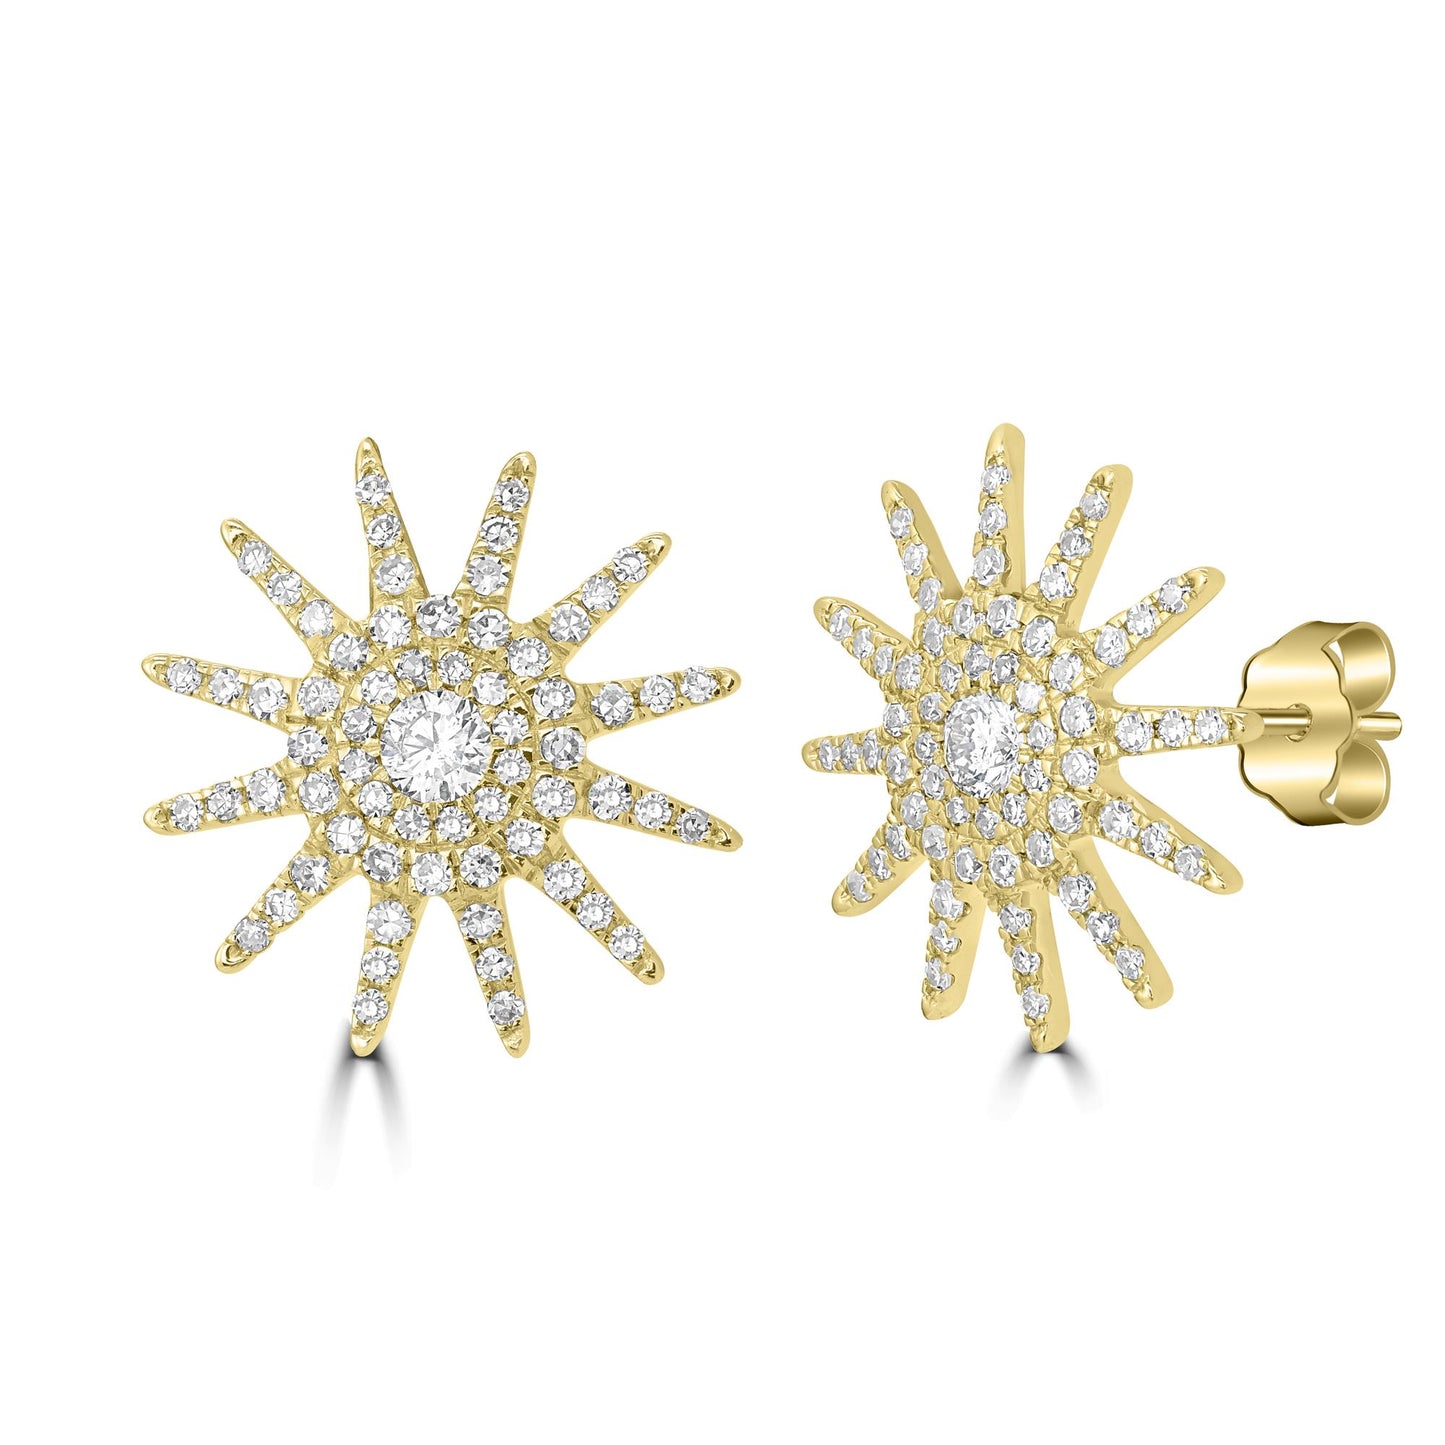 The Stardust Earrings-14K Yellow Gold with Diamonds